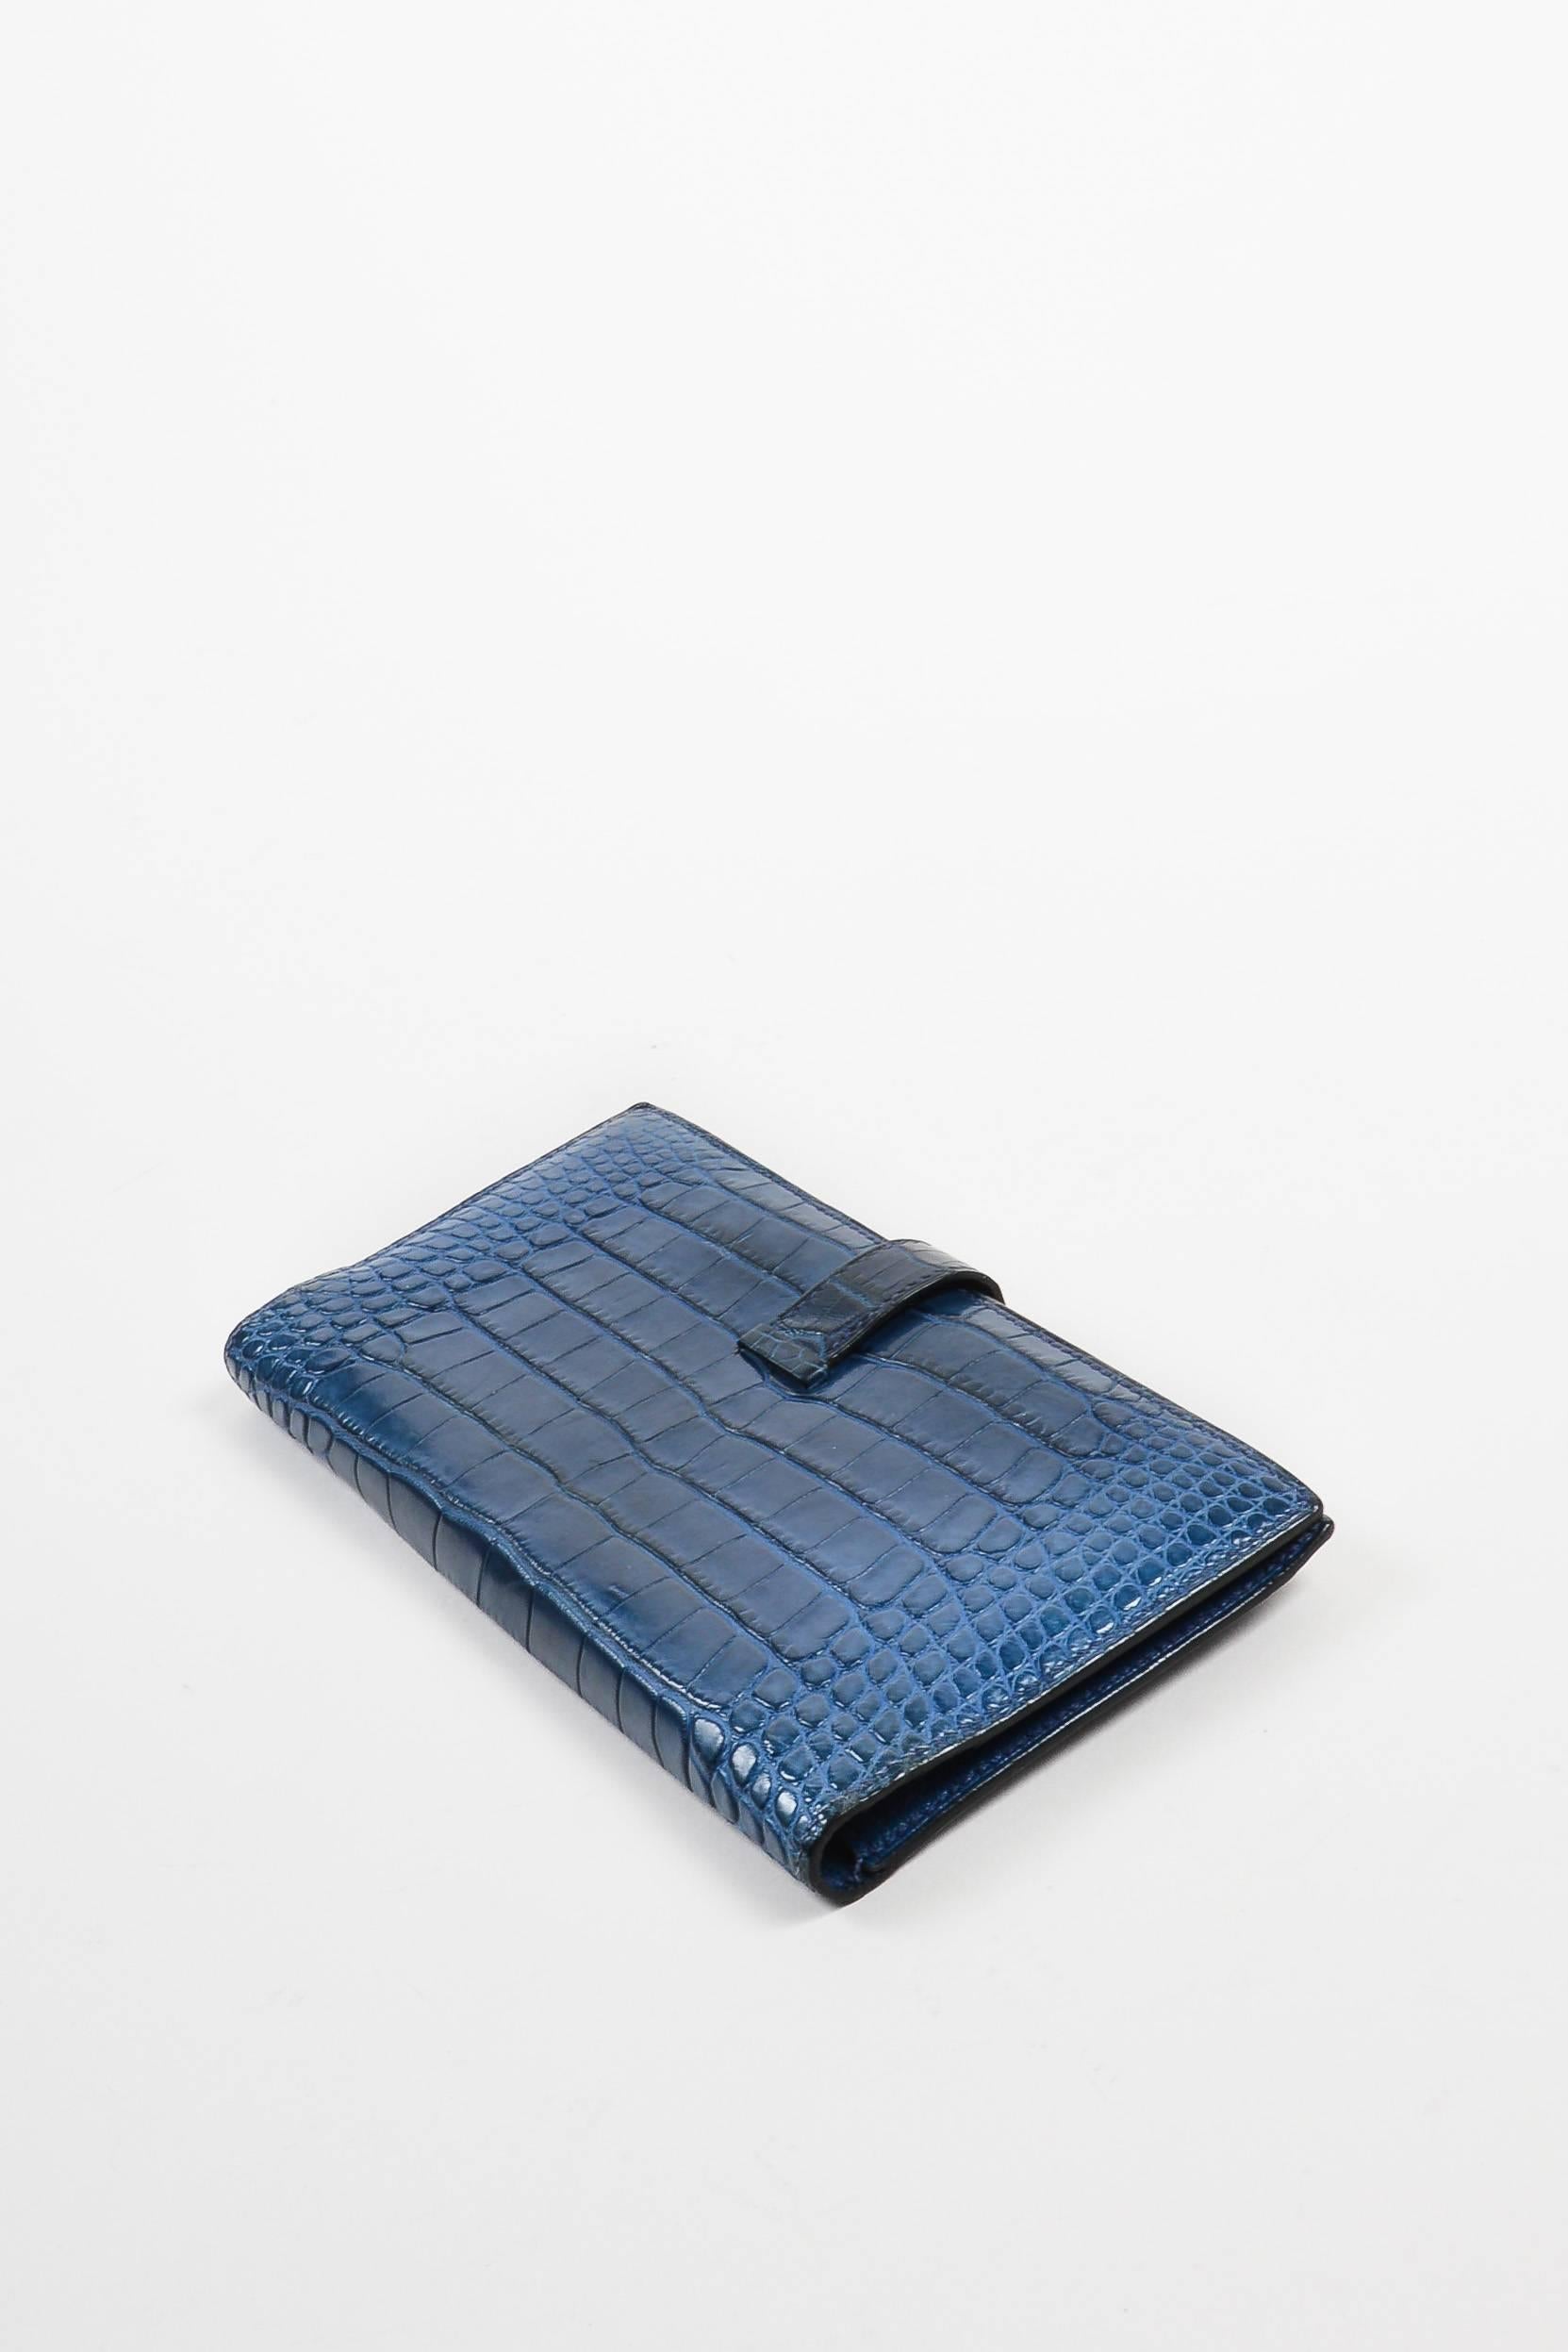 Rich, marine blue genuine alligator leather wallet from Hermes. Palladium-plated silver-tone 'H' hardware at front; leather tab slips through hardware for closure. Leather-lined interior. Date code: [F] 25A. Comes in box. 

Interior Features: